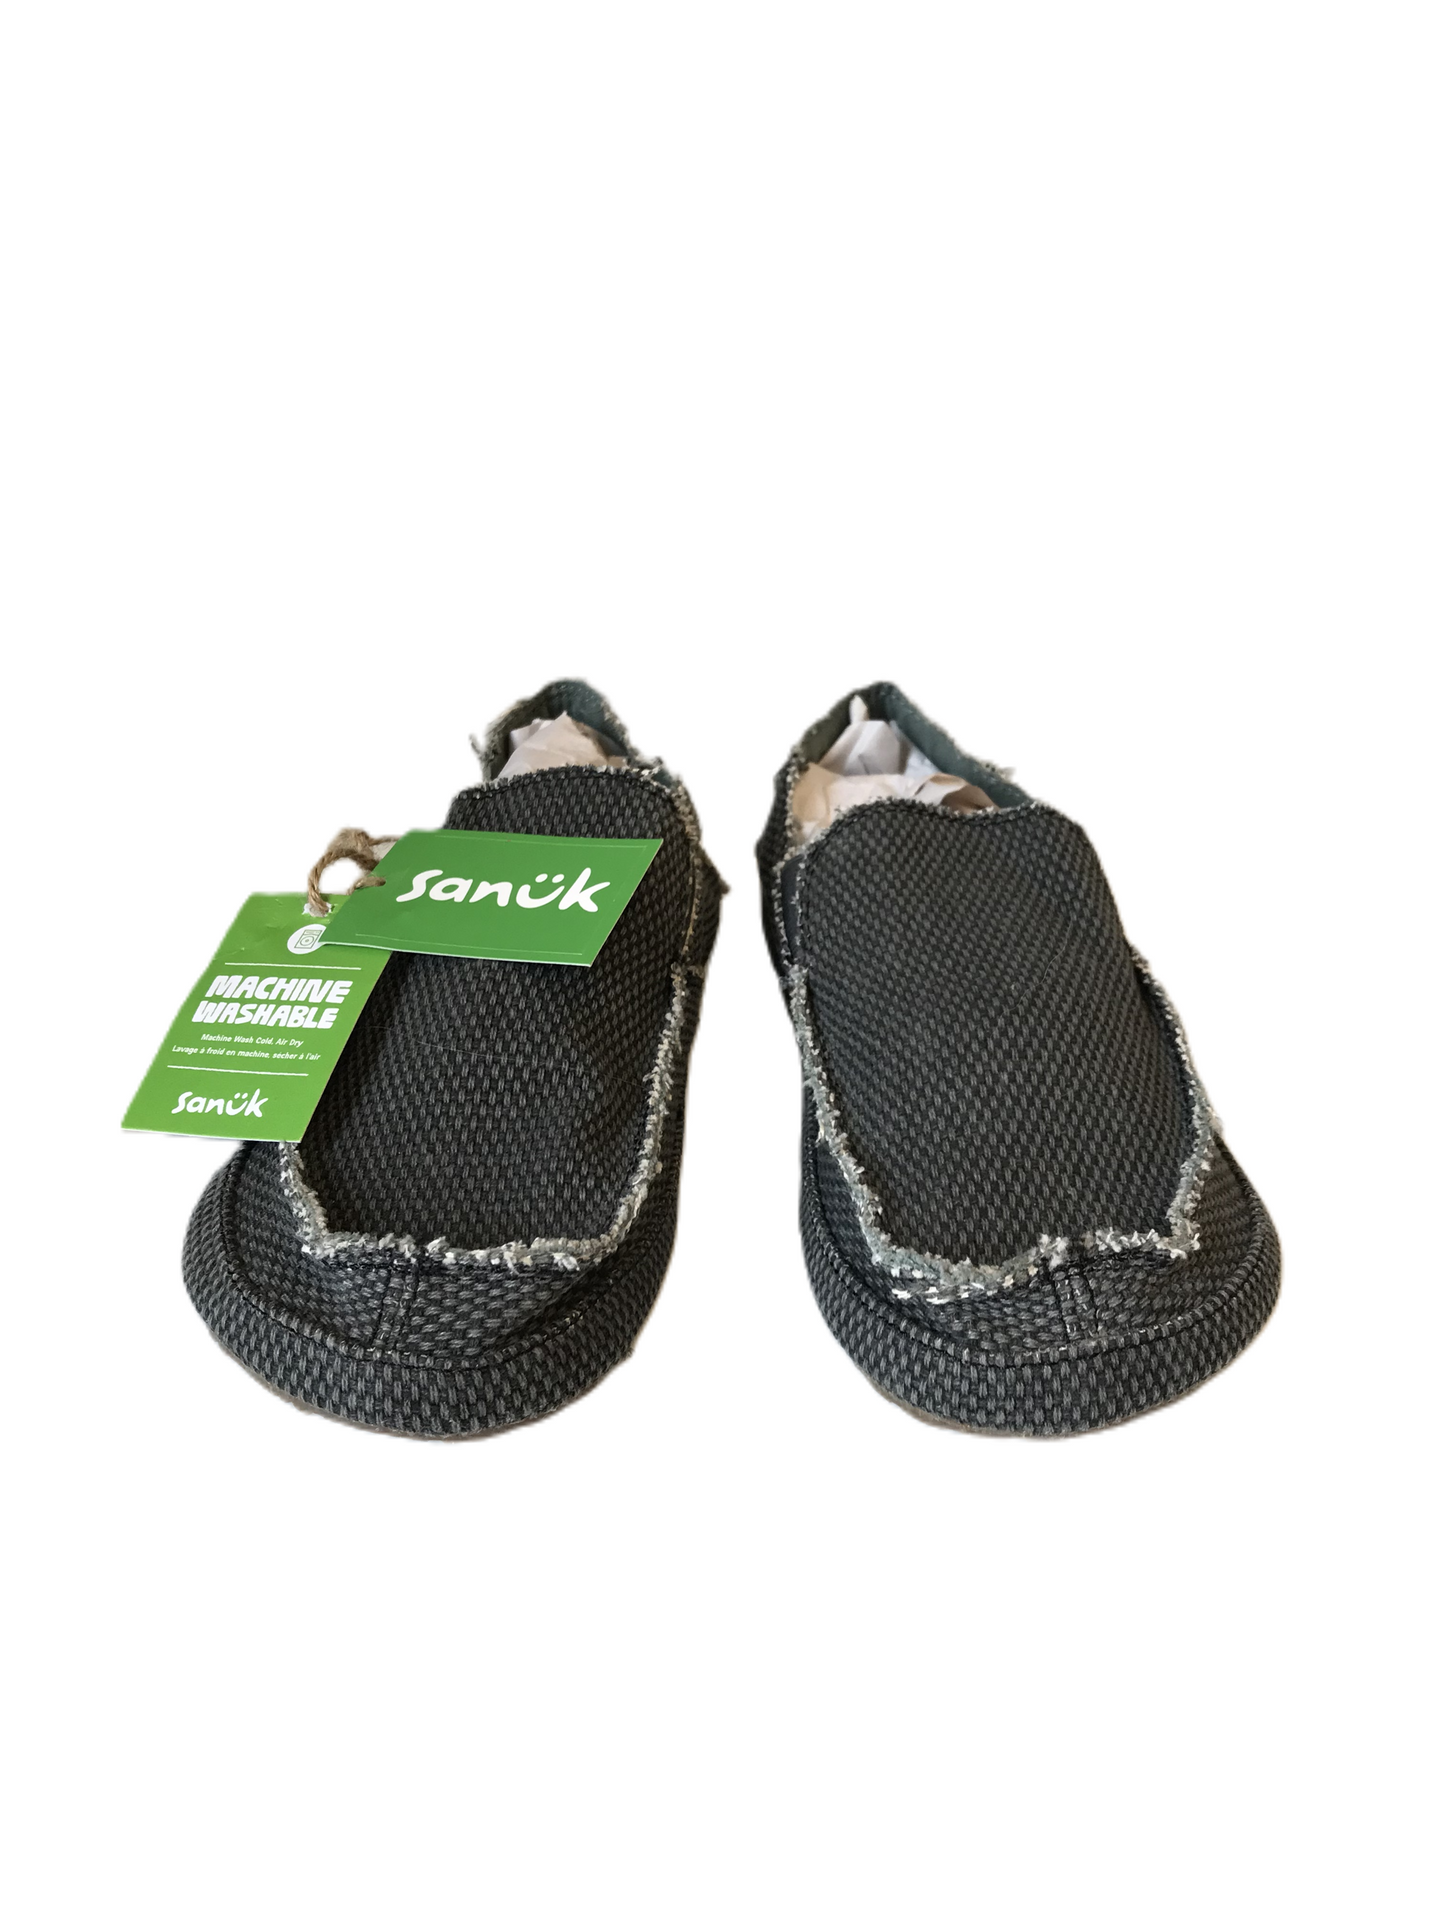 Shoes Sneakers By Sanuk  Size: 7